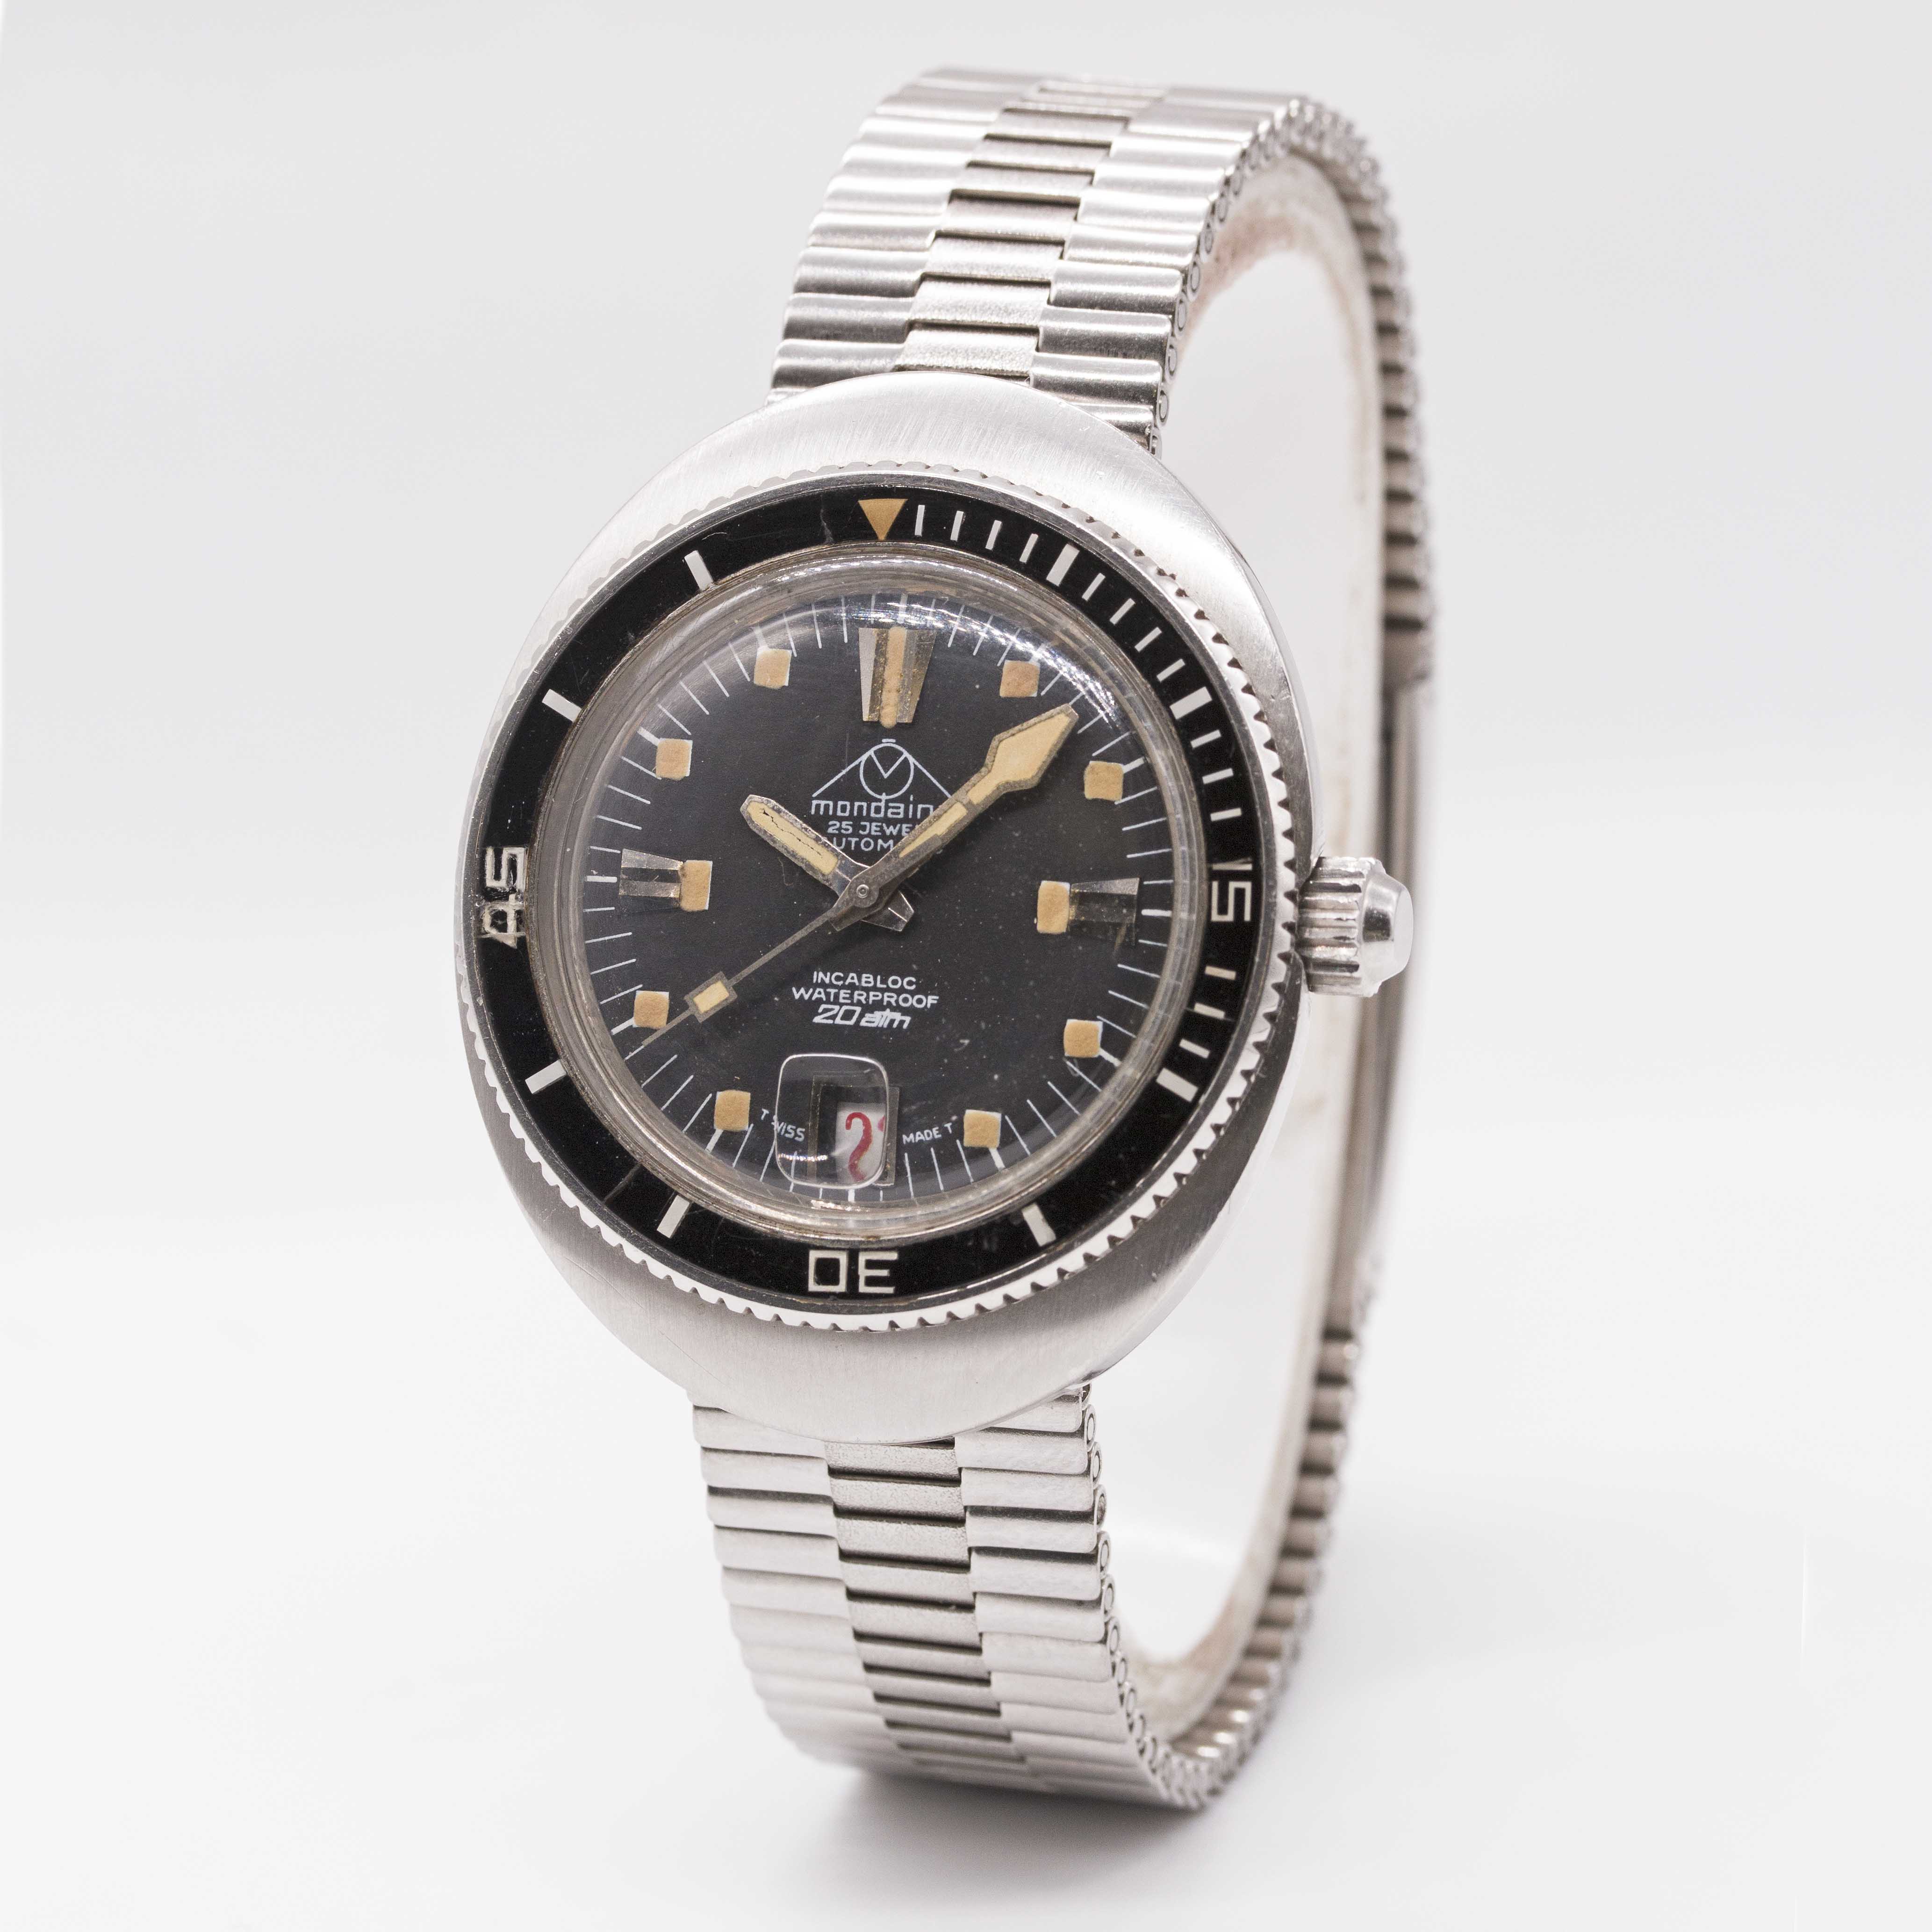 A GENTLEMAN'S STAINLESS STEEL MONDAINE AUTOMATIC DIVERS BRACELET WATCH CIRCA 1970, WITH "SERPENT" - Image 4 of 7